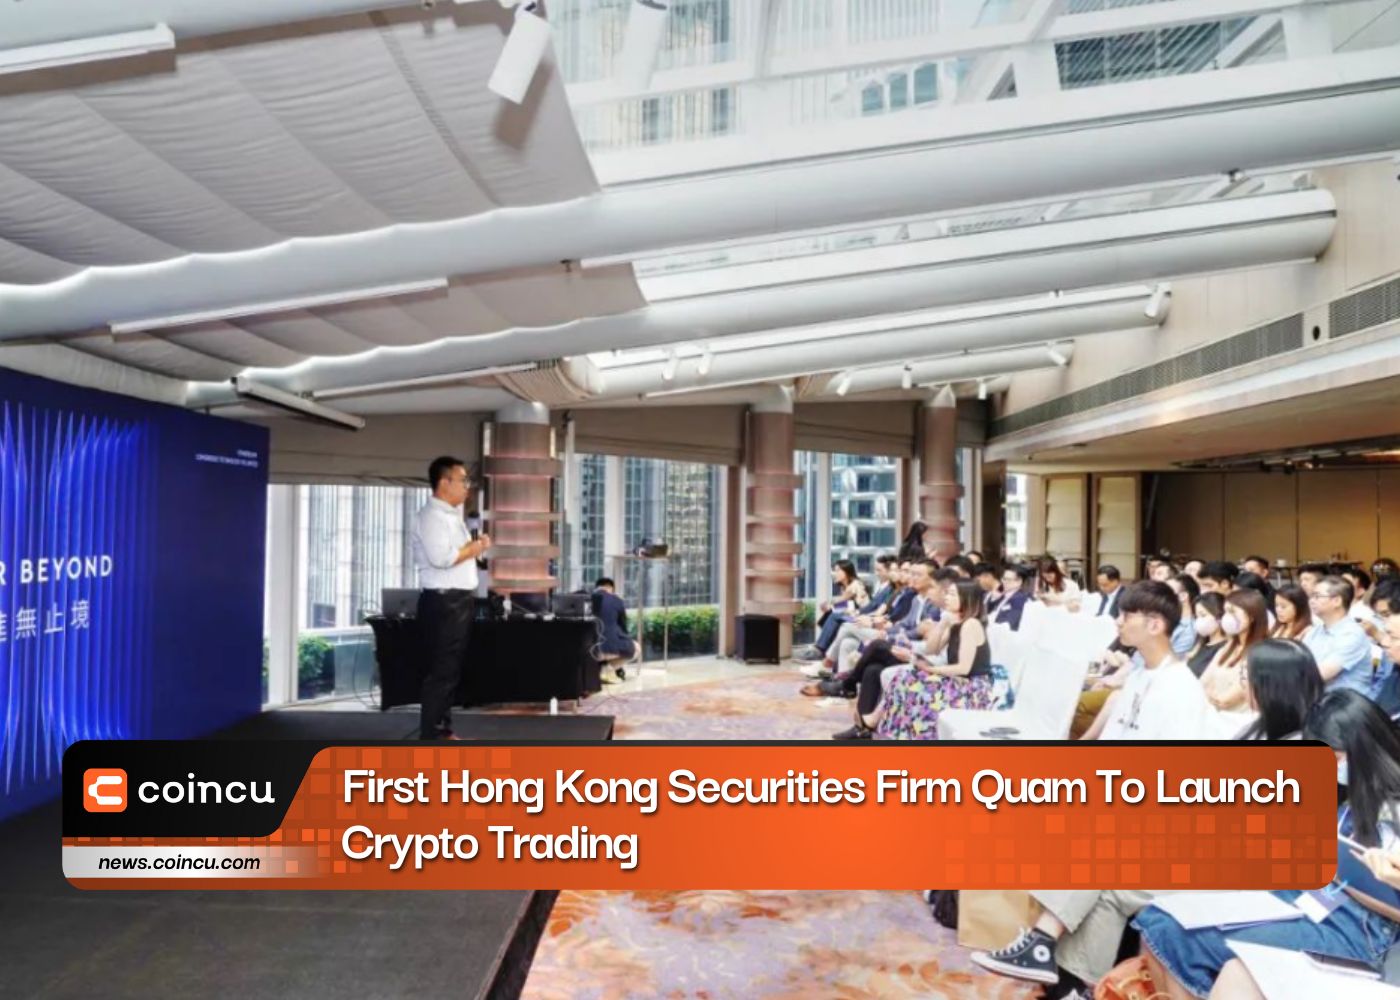 First Hong Kong Securities Firm Quam To Launch Crypto Trading